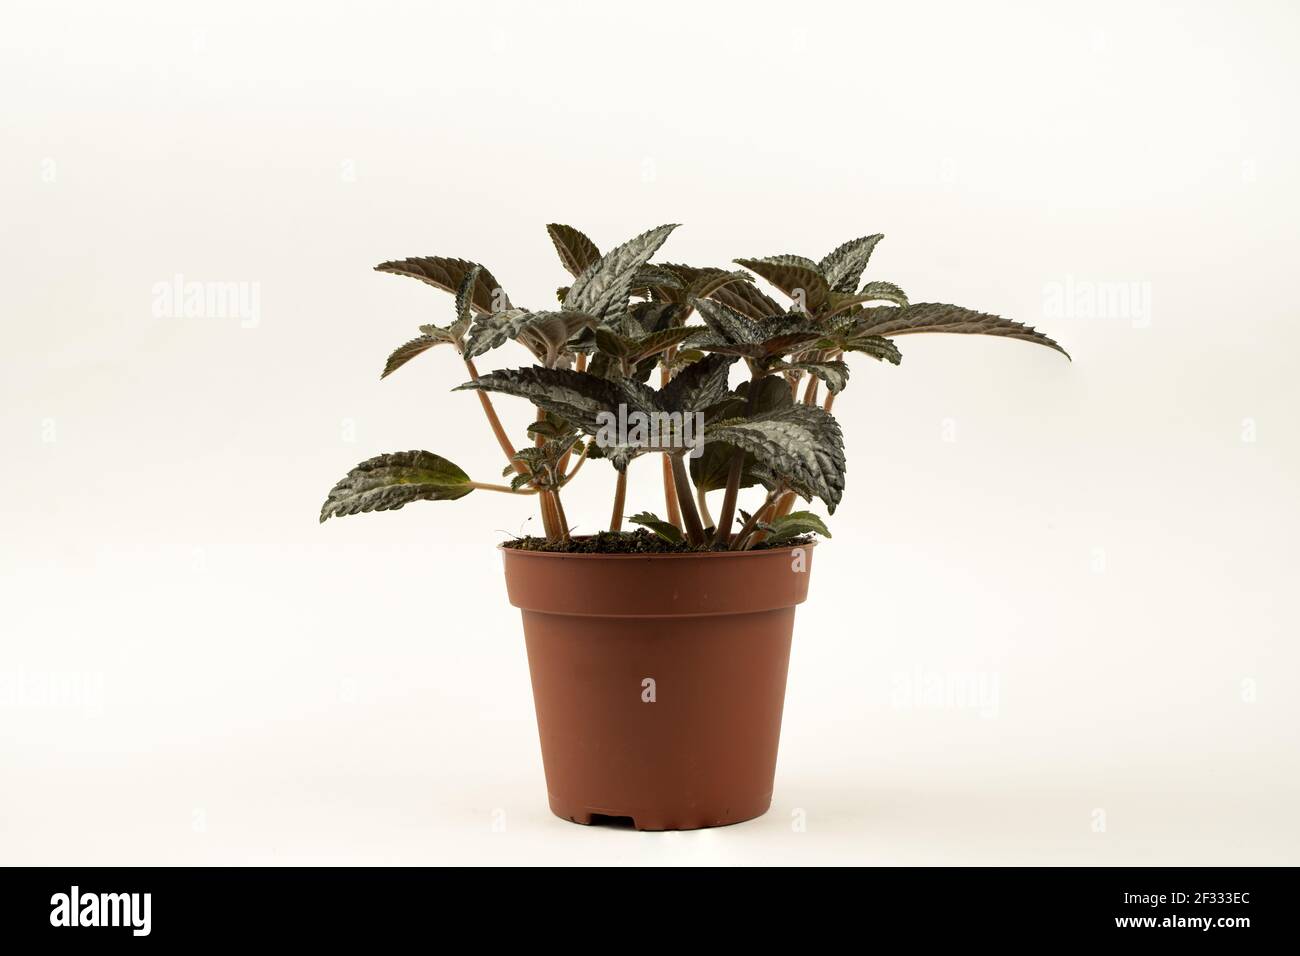 Pilea spruceana in flowerpot with white background Stock Photo